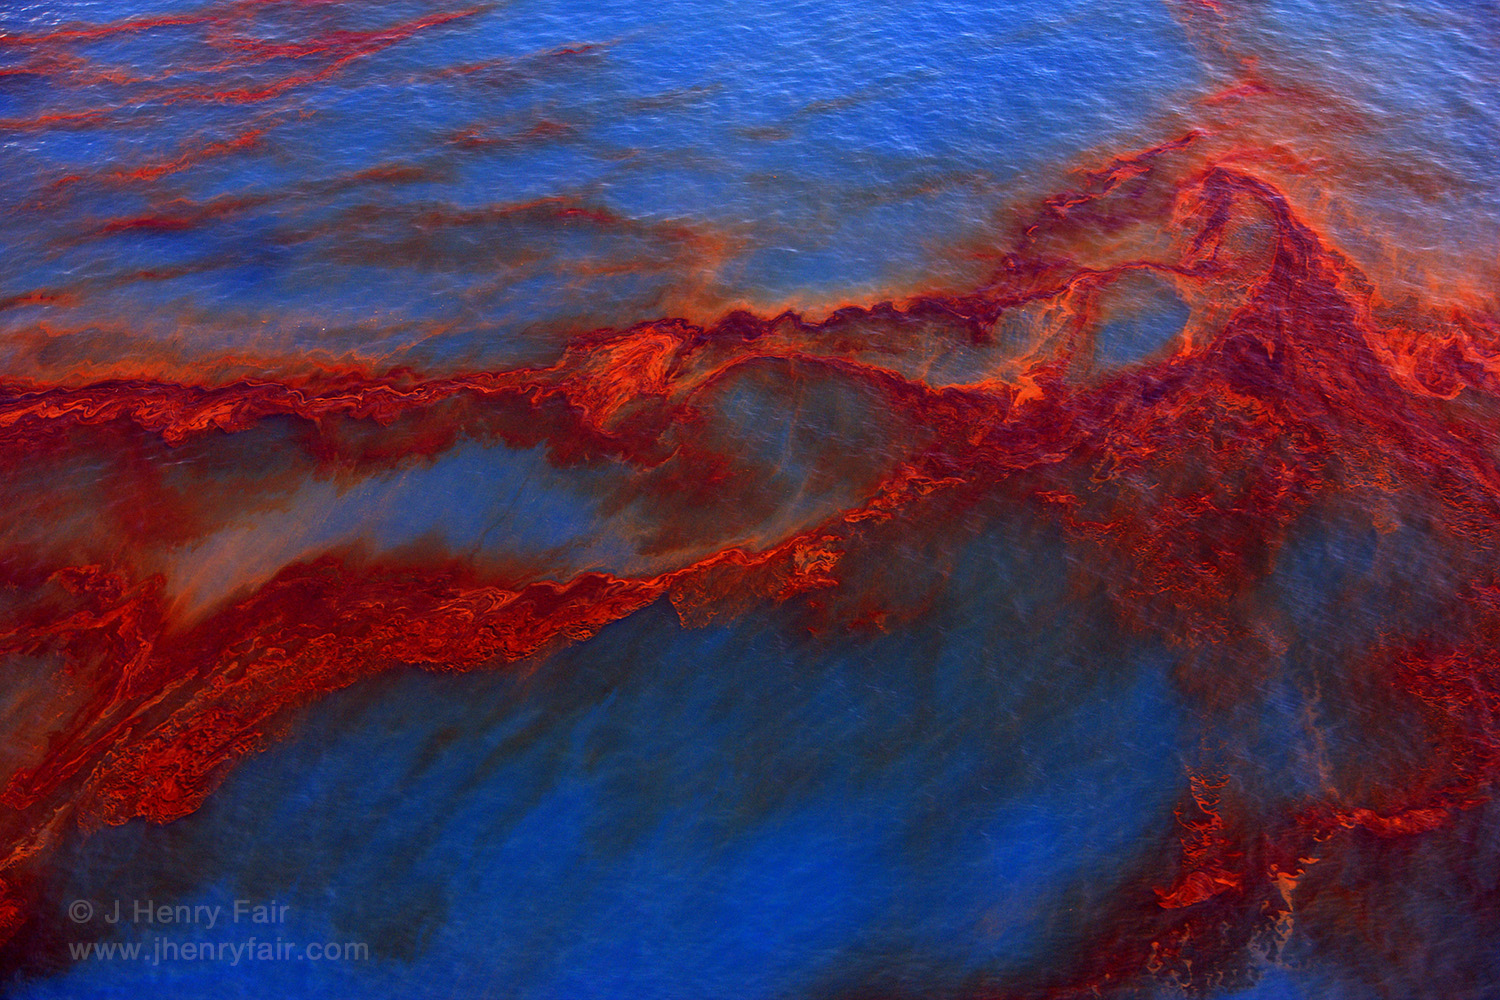 Oil from BP Deepwater Horizon spill at the Gulf Macondo well floats on the Gulf of Mexico